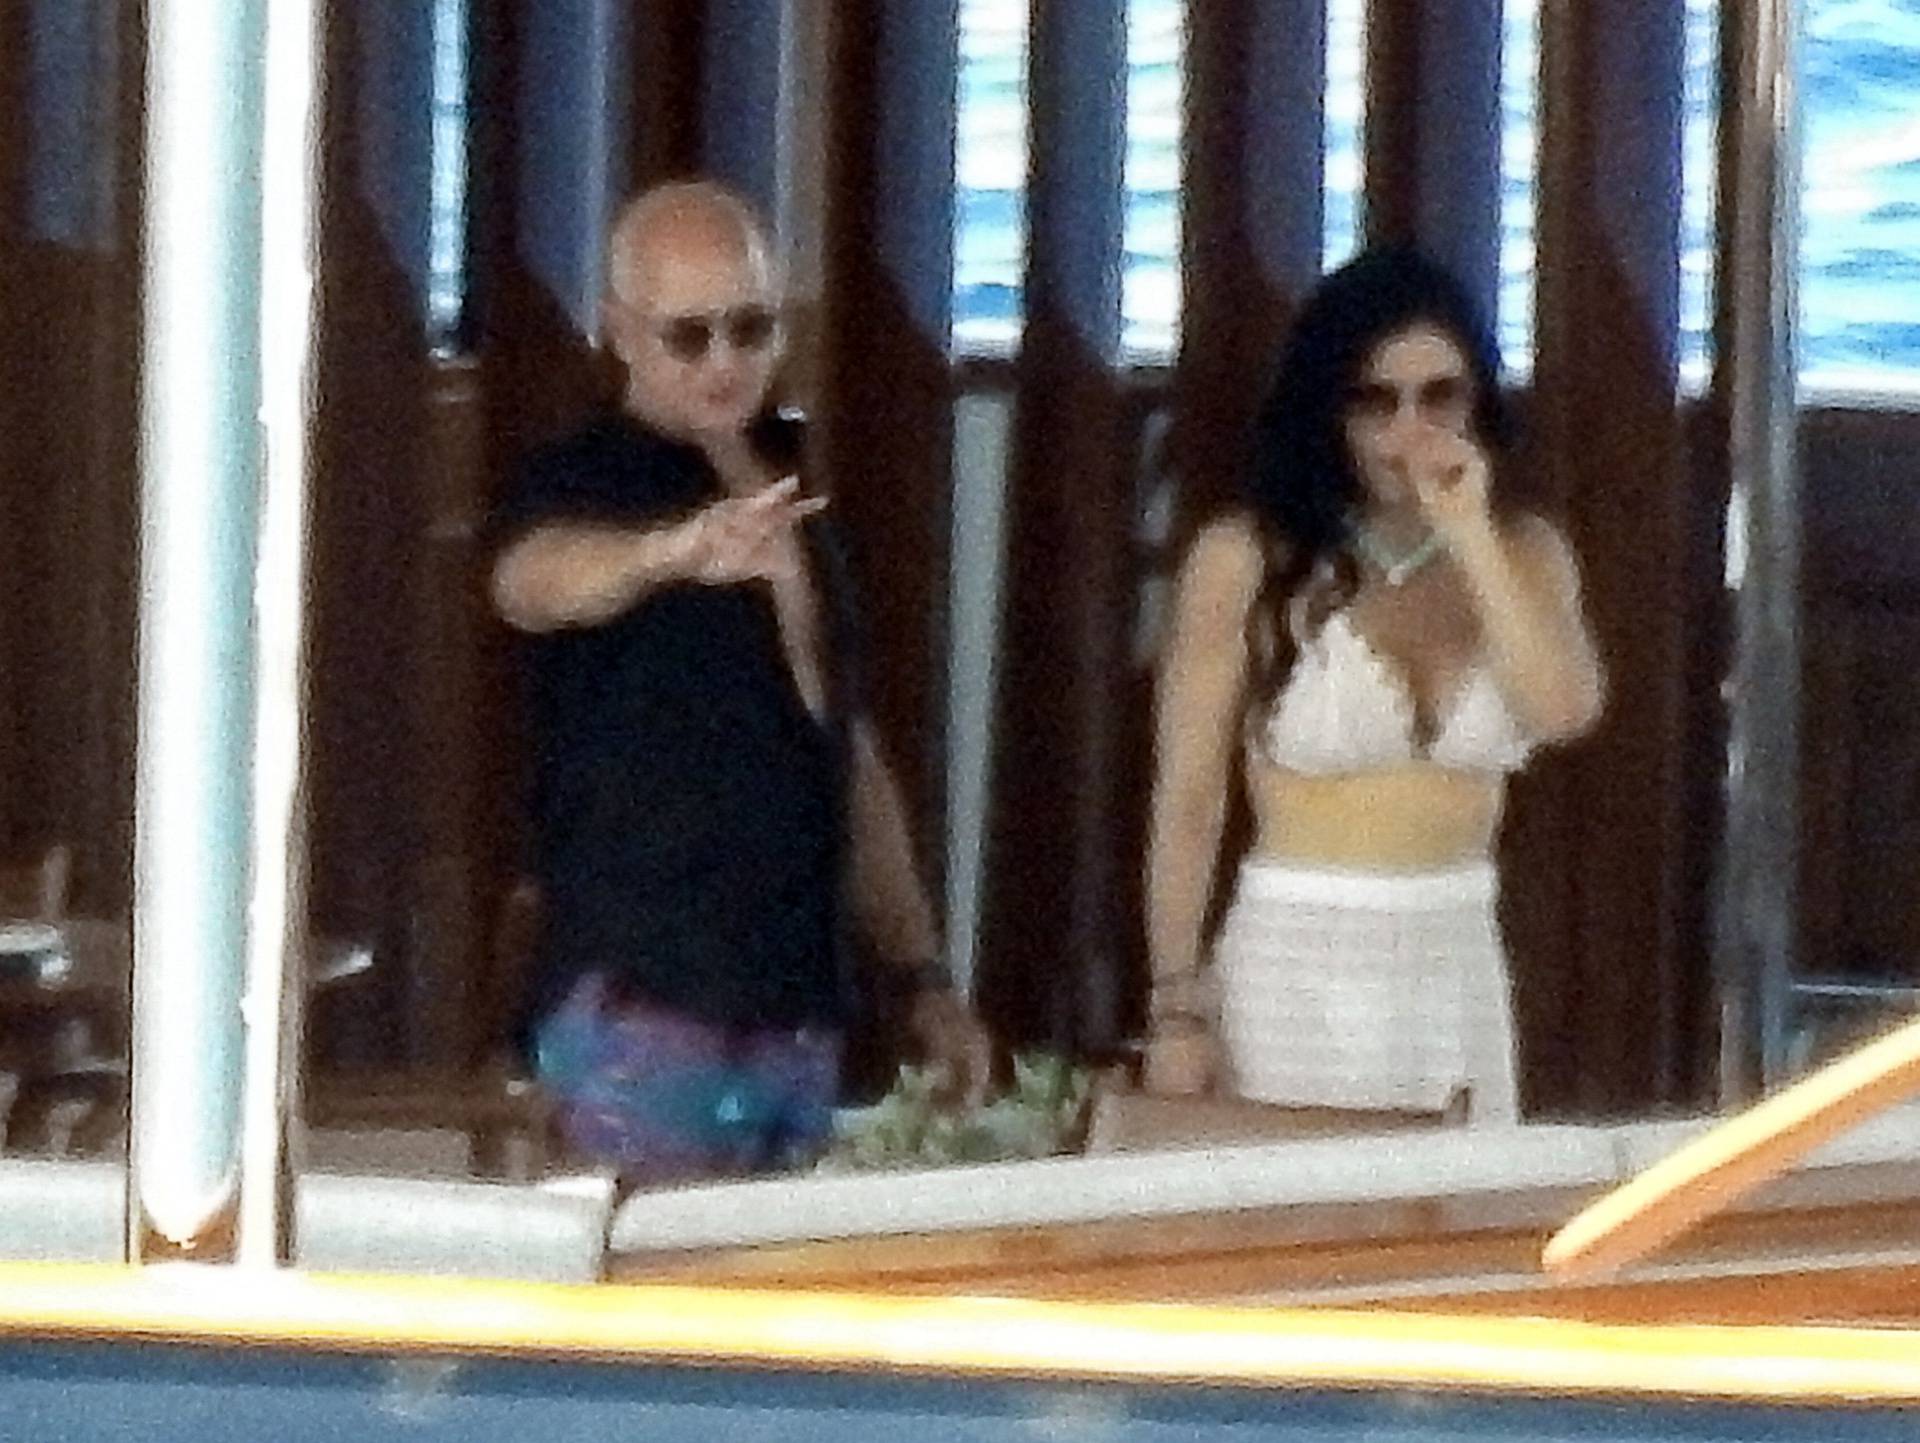 PREMIUM EXCLUSIVE: *NO WEB UNTIL 630PM EDT 12TH AUG* Demi Moore visits Amazon founder Jeff Bezos and fiancee Lauren Sanchez for a leisurely lunch onboard his $500m superyacht in Greece